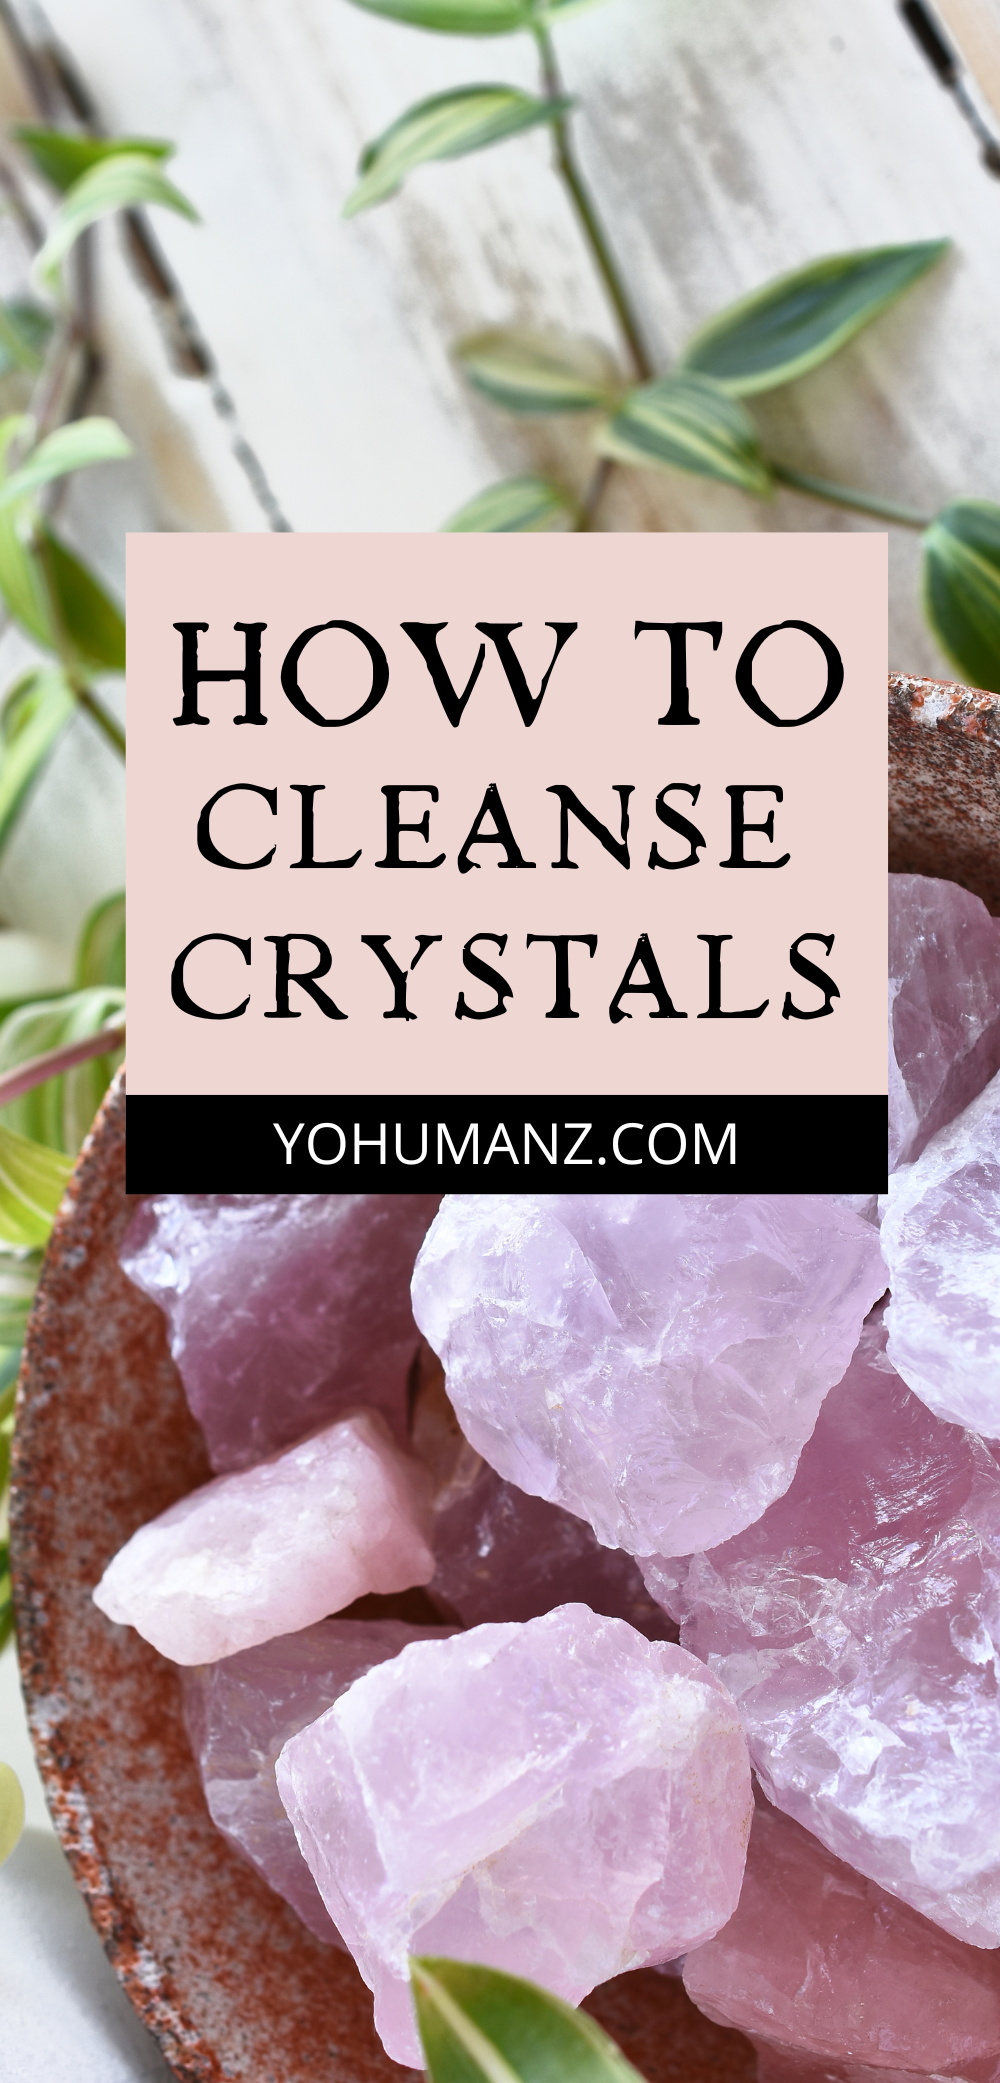 how to cleanse crystals